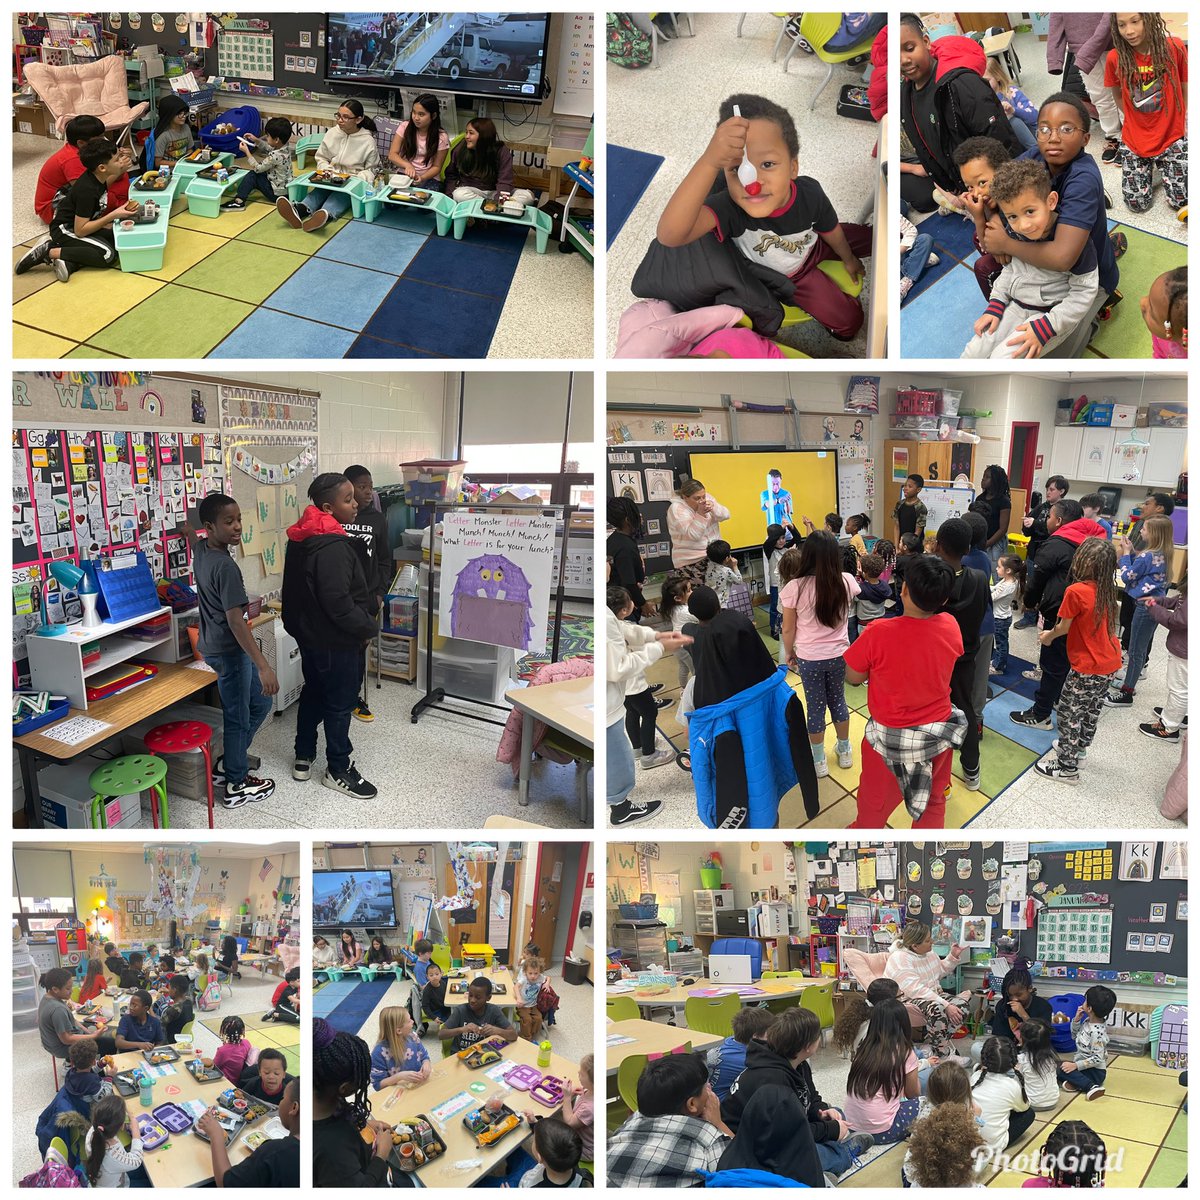 My 5th graders ended #kindnessweek by spending #morningmeeting with our Pre-K friends! Thank you @bluidteacher6 for helping me make today magical for our kiddos! My kids are ready to come by weekly! #parkwayfever @katie_catania @LeticiaNewsome @VBTitleI @vbschools